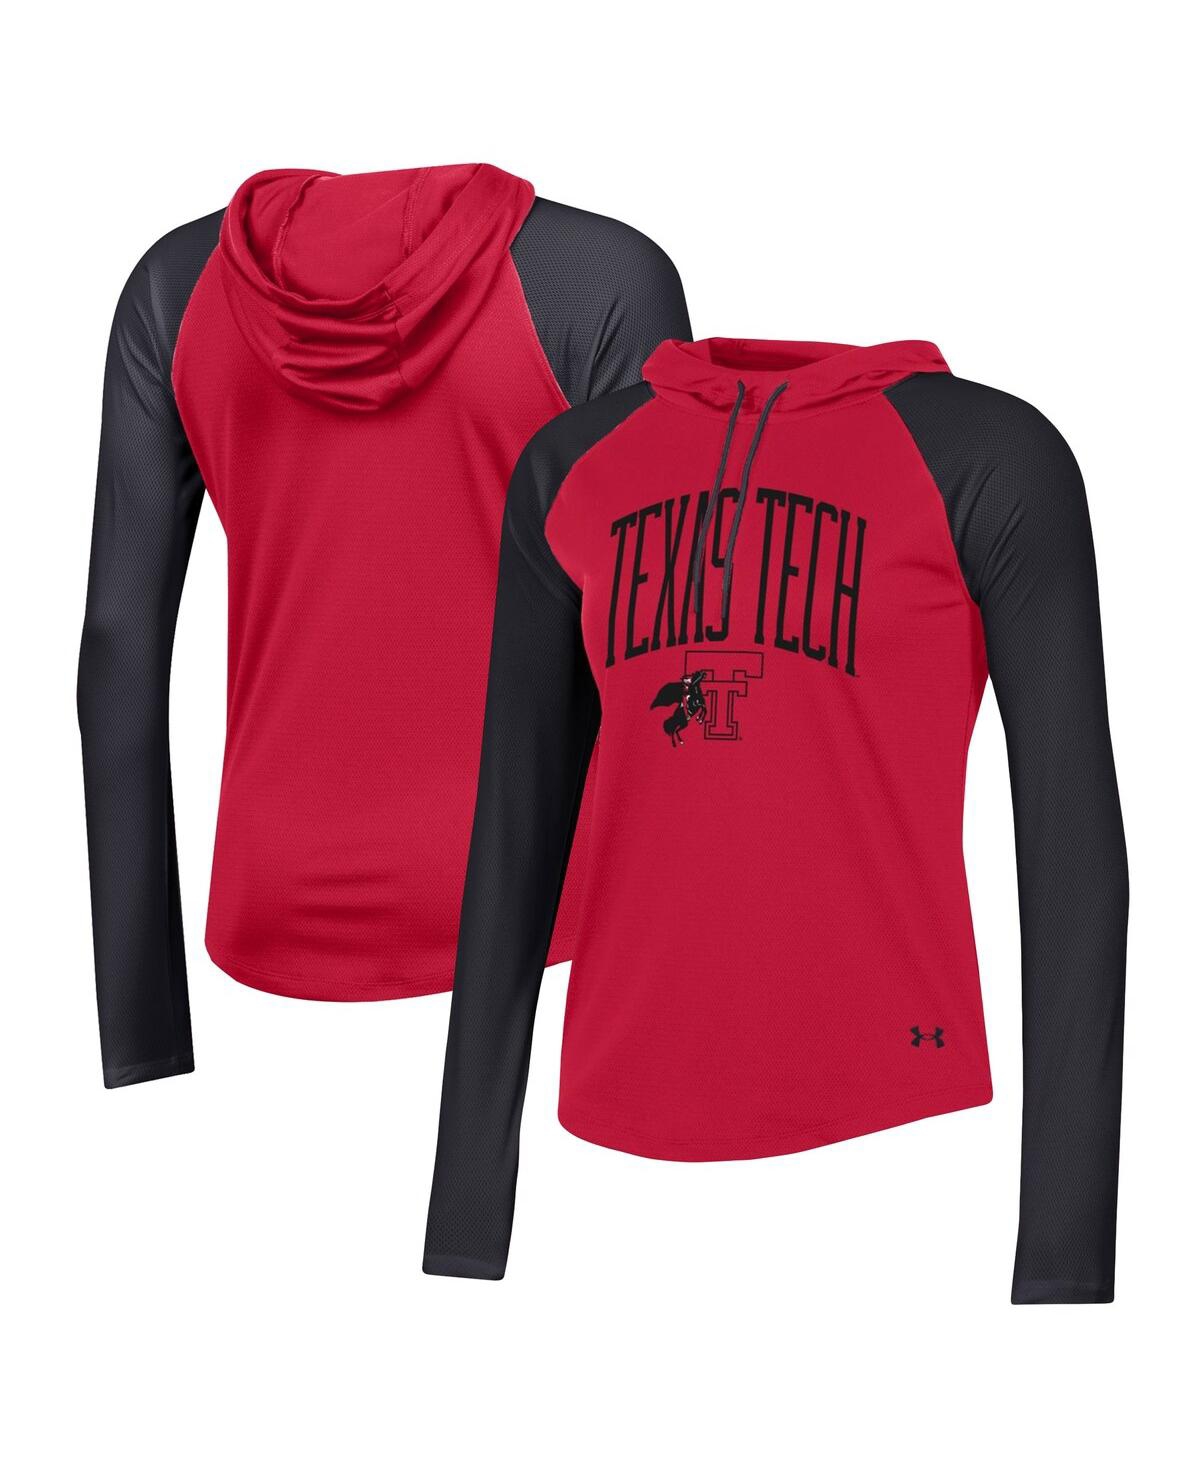 Shop Under Armour Women's  Red Texas Tech Red Raiders Gameday Mesh Performance Raglan Hooded Long Sleeve T